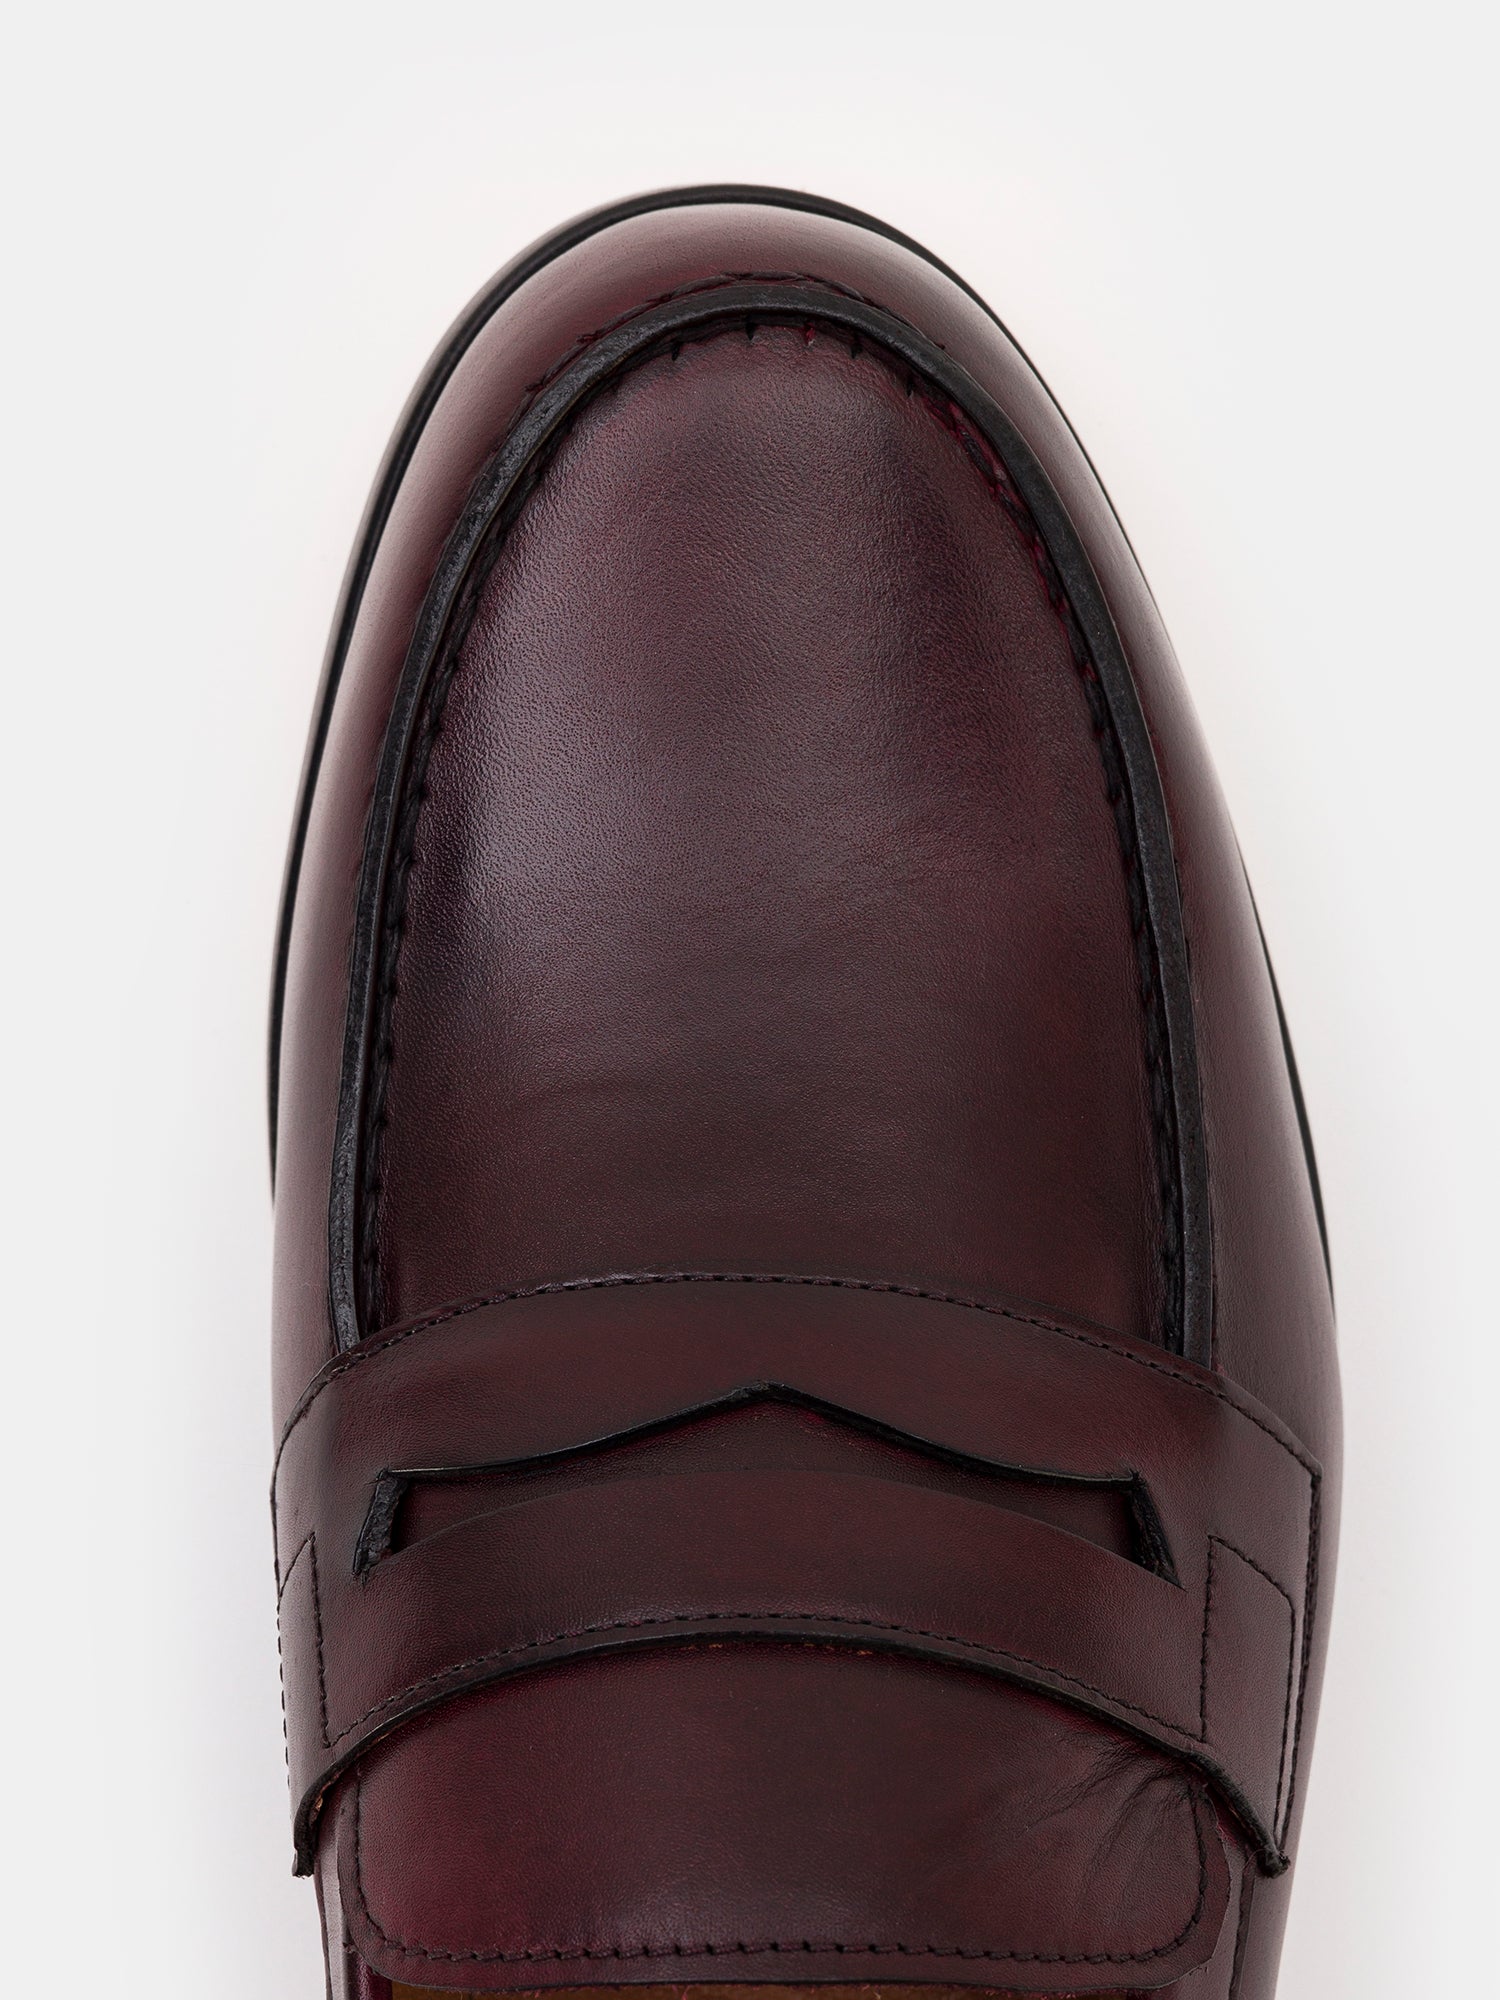 Bordeaux Leather Penny Loafers